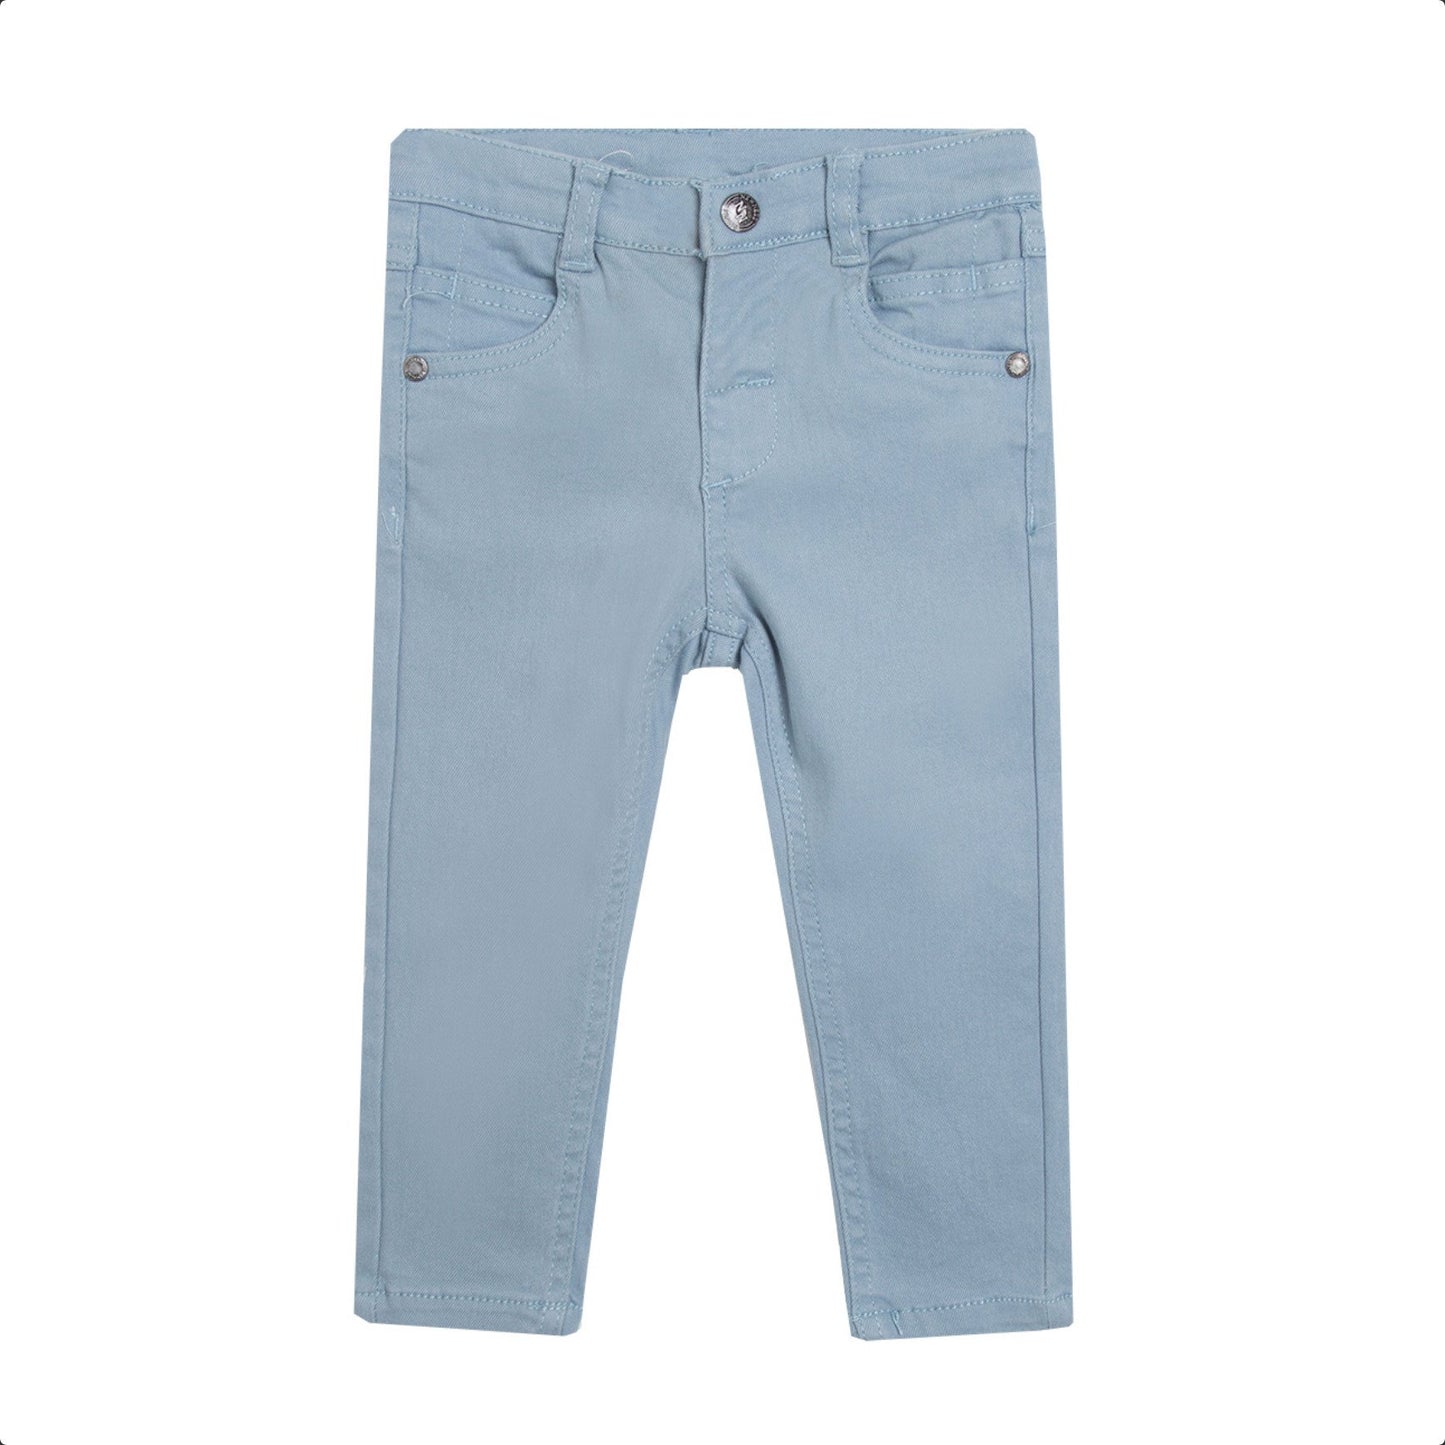 Light Blue Baby Unisex Elasticated Jeans - 0 to 9 months - Stylemykid.com